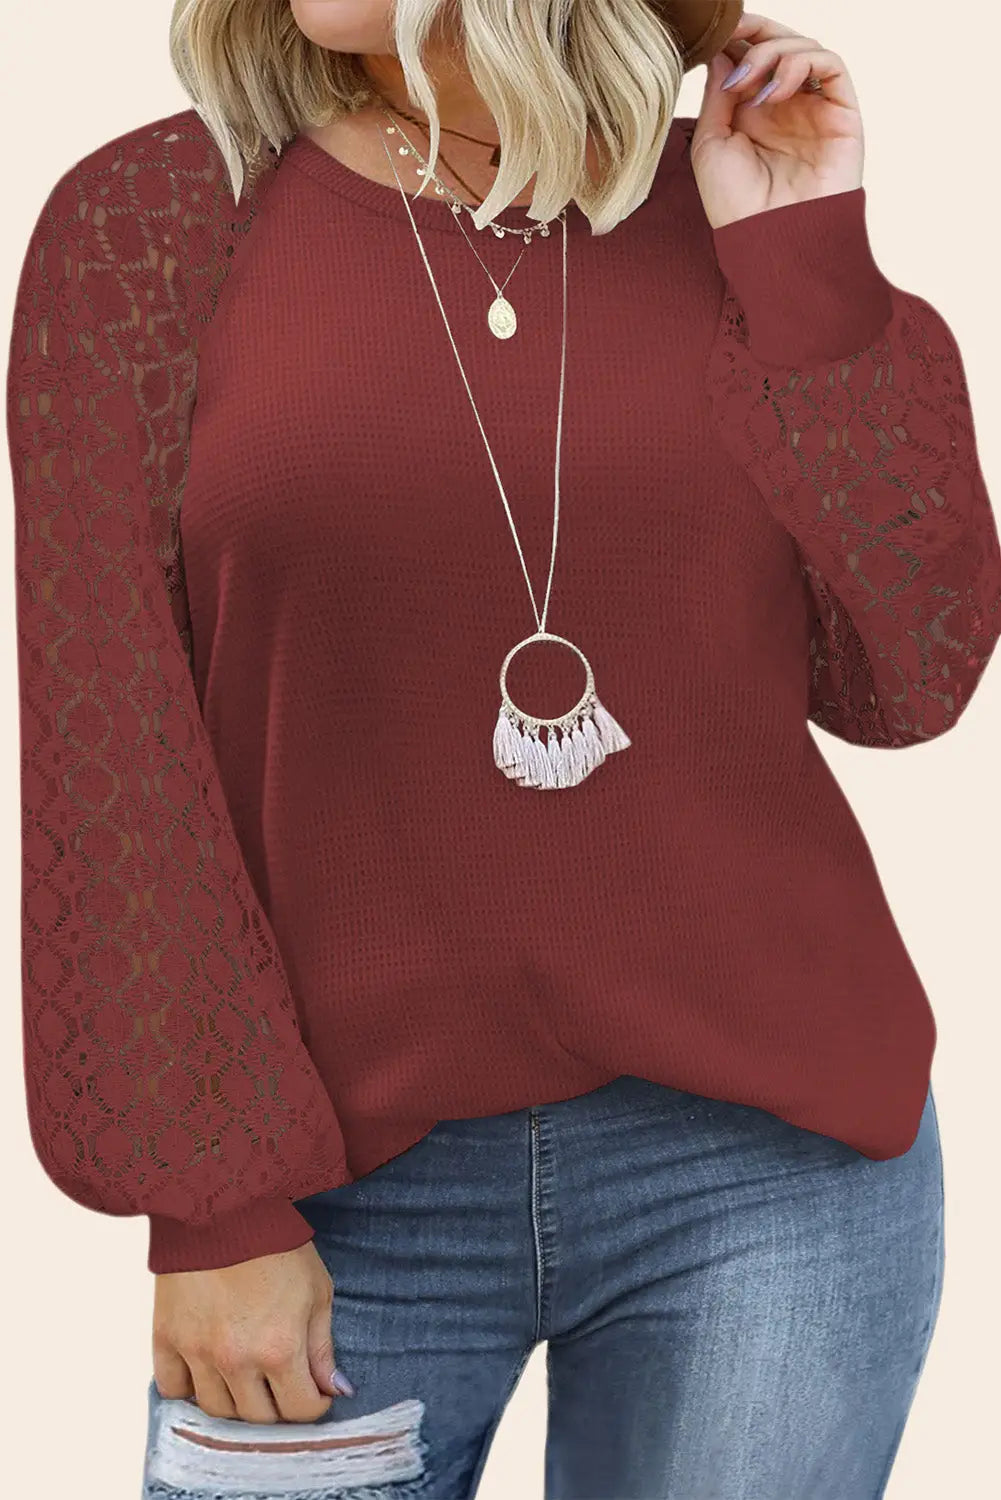 Red sequin mardi gras lace raglan sleeve plus size pullover - red1 / 1x 95% polyester + 5% elastane graphic